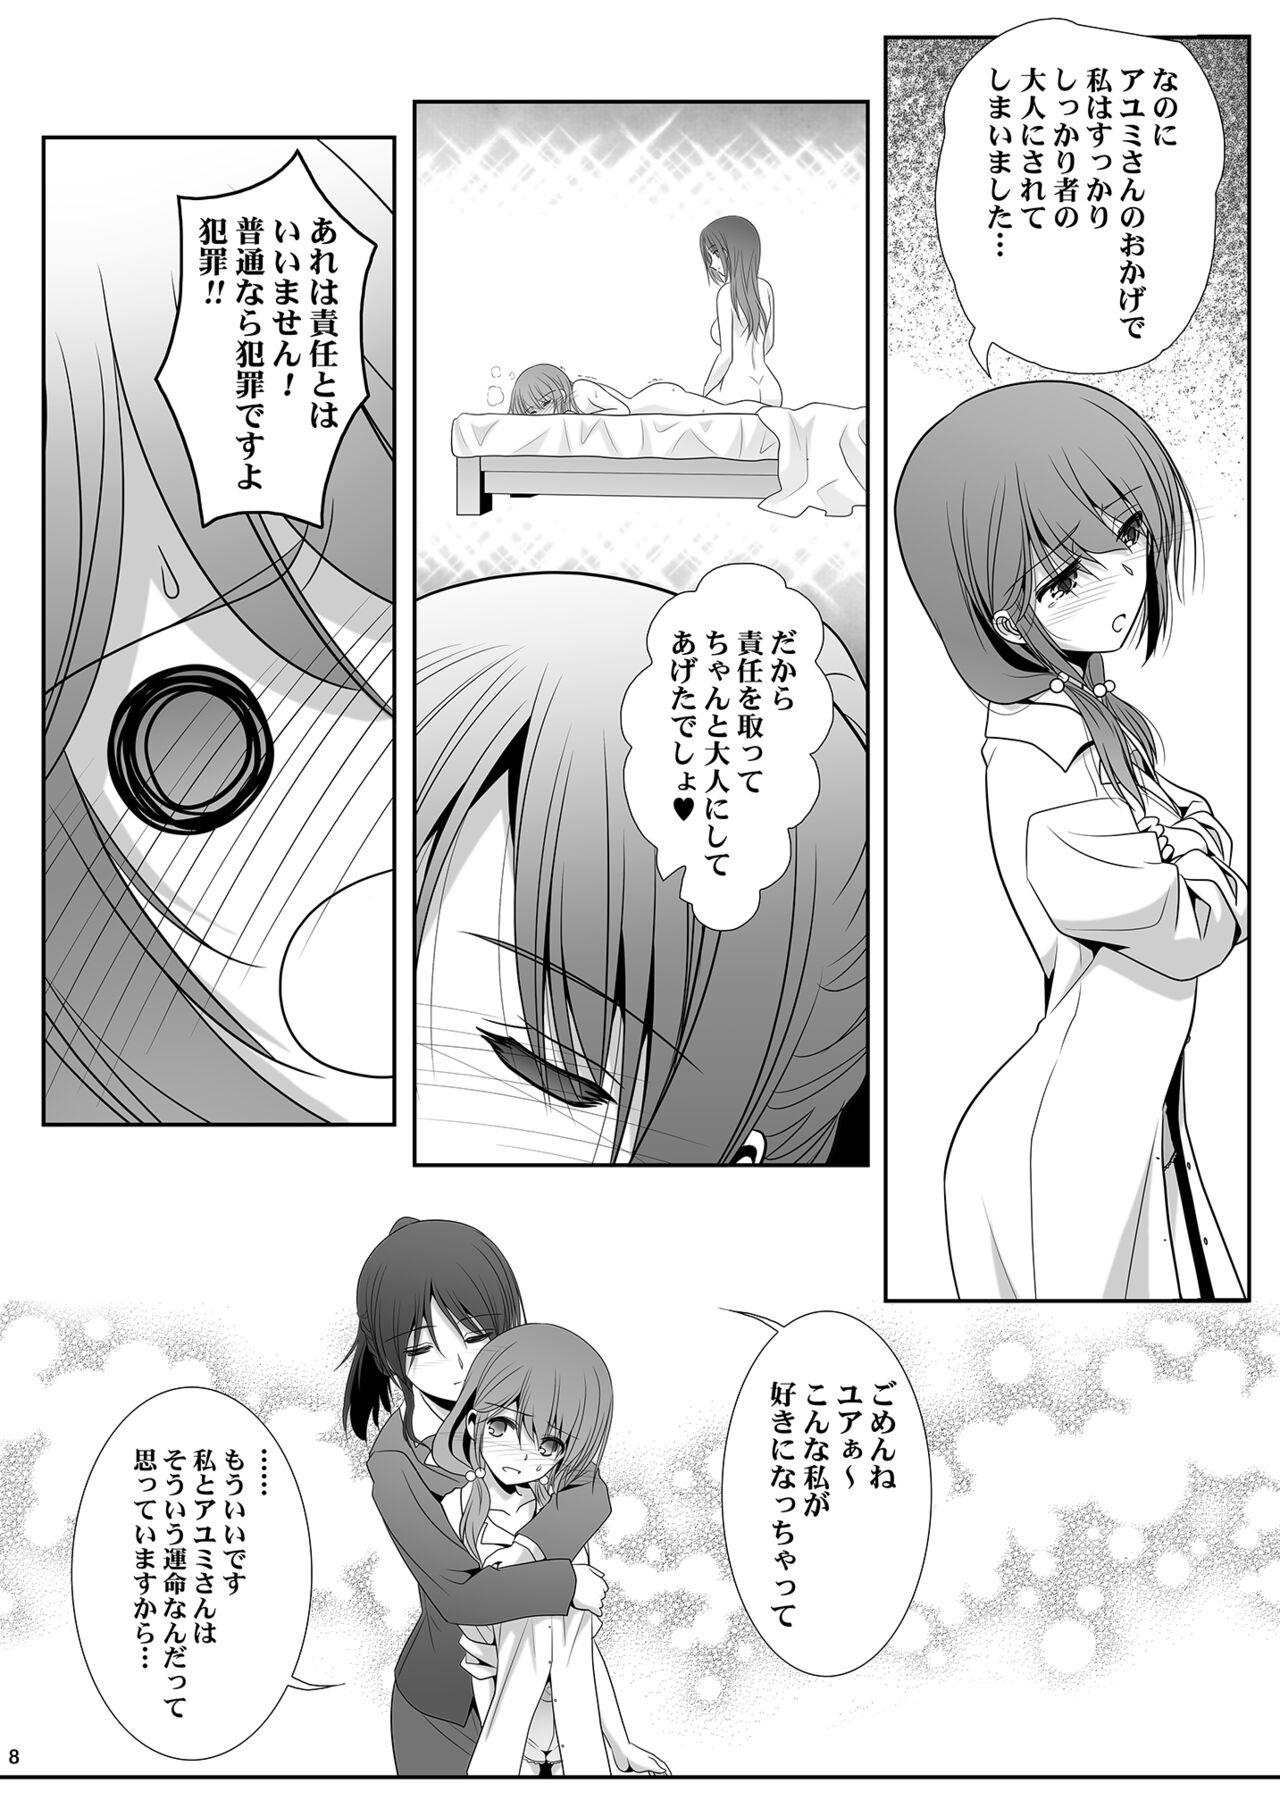 Cutie Toshi no Thirteen - Age Difference is 13 Years - Original Job - Page 8